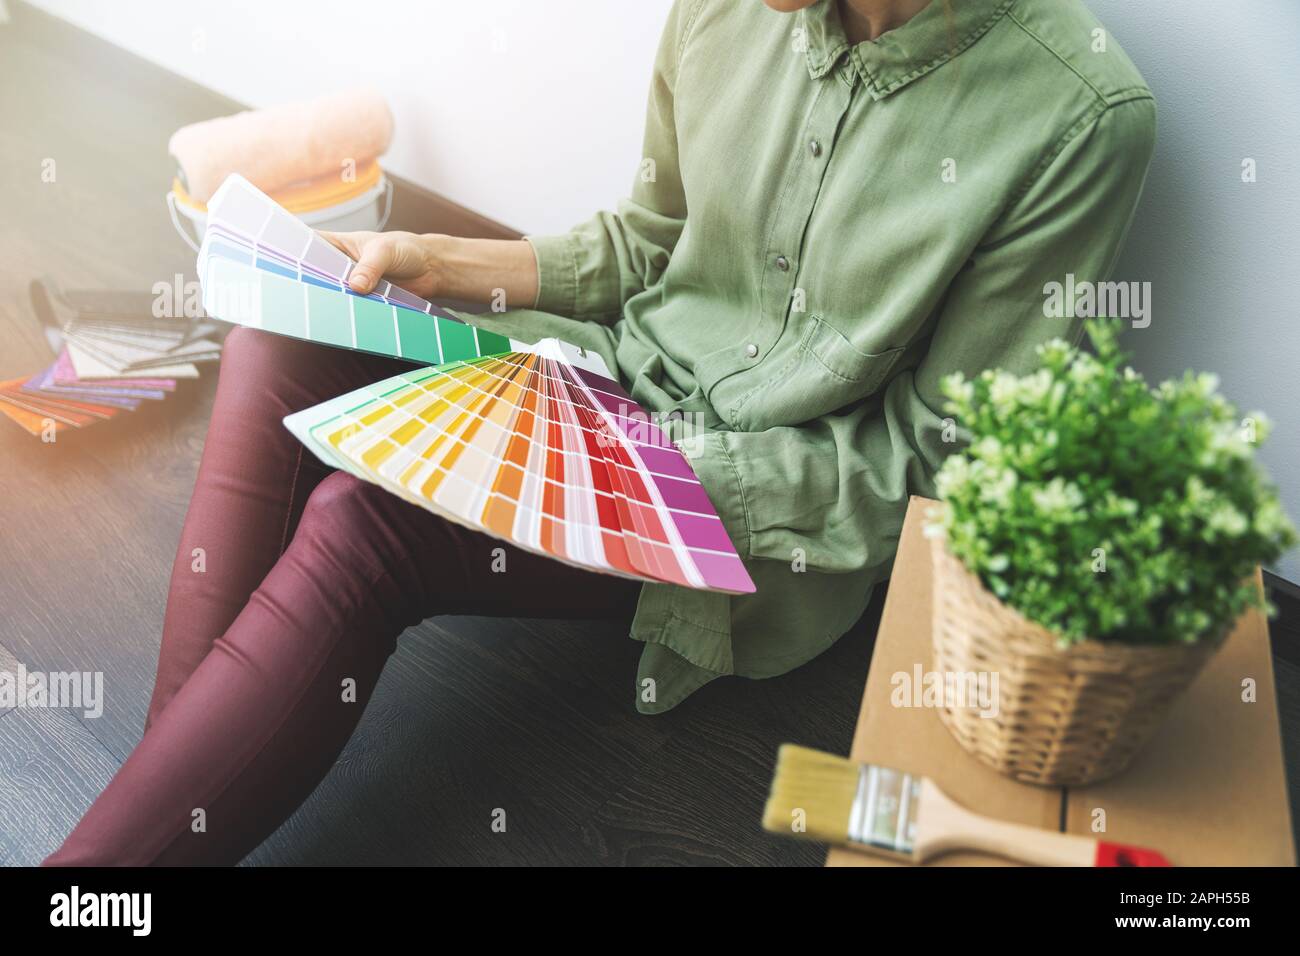 woman sitting on the floor in the room and choosing paint color from samples for new interior design Stock Photo